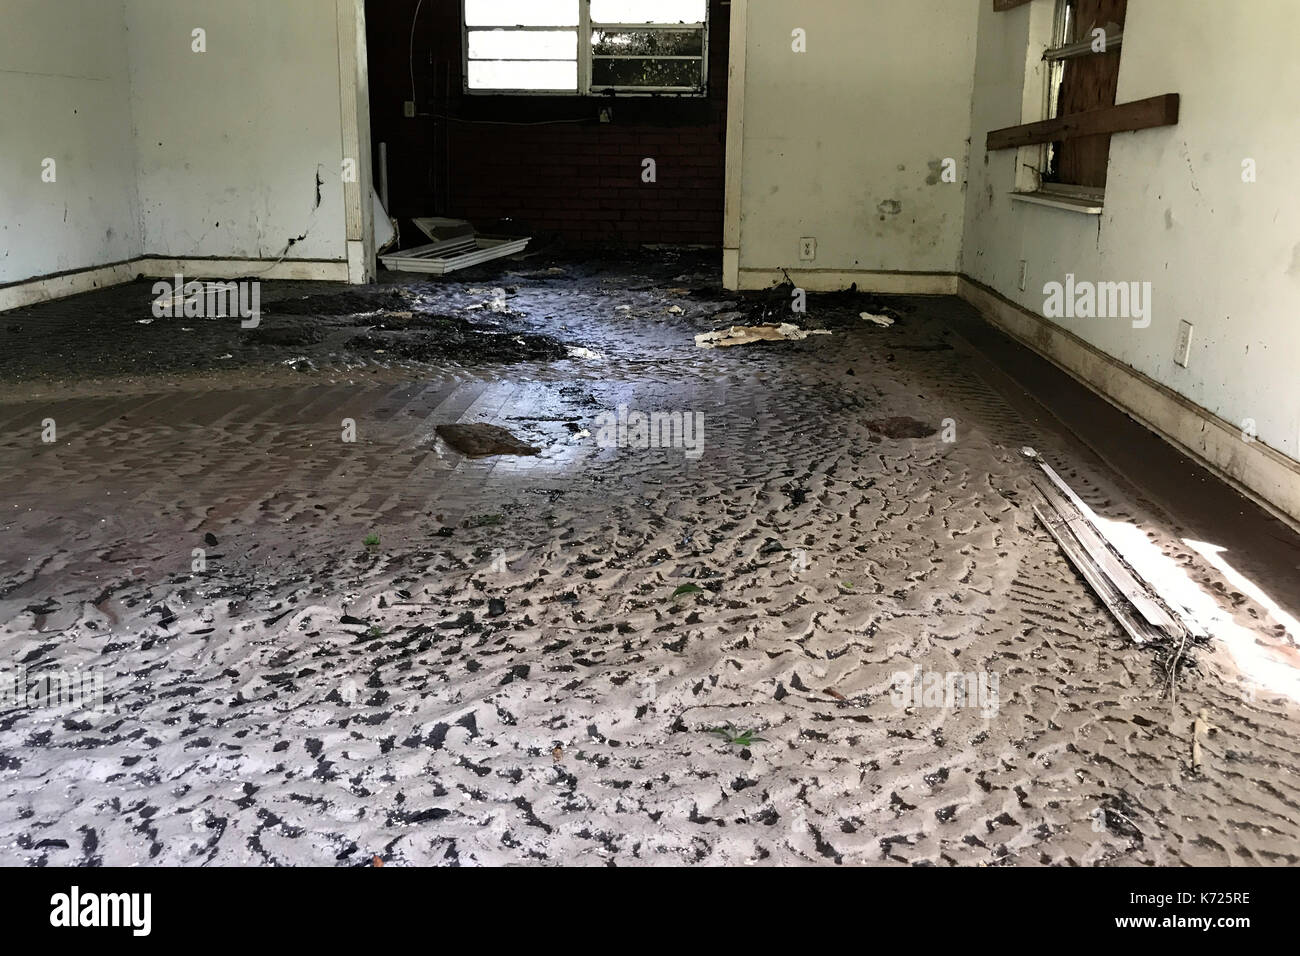 United States. 13th Sep, 2017. Interior view inside an abandoned property in Middleburg, FL, on September 13, 2017. Residents of homes near Black Creek, Clay County, Florida return to find homes submerged by historic 28.5-foot flooding after Hurricane Irma took an unexpected turn and caused major damages in the region. Credit: Bastiaan Slabbers/Alamy Live News Stock Photo